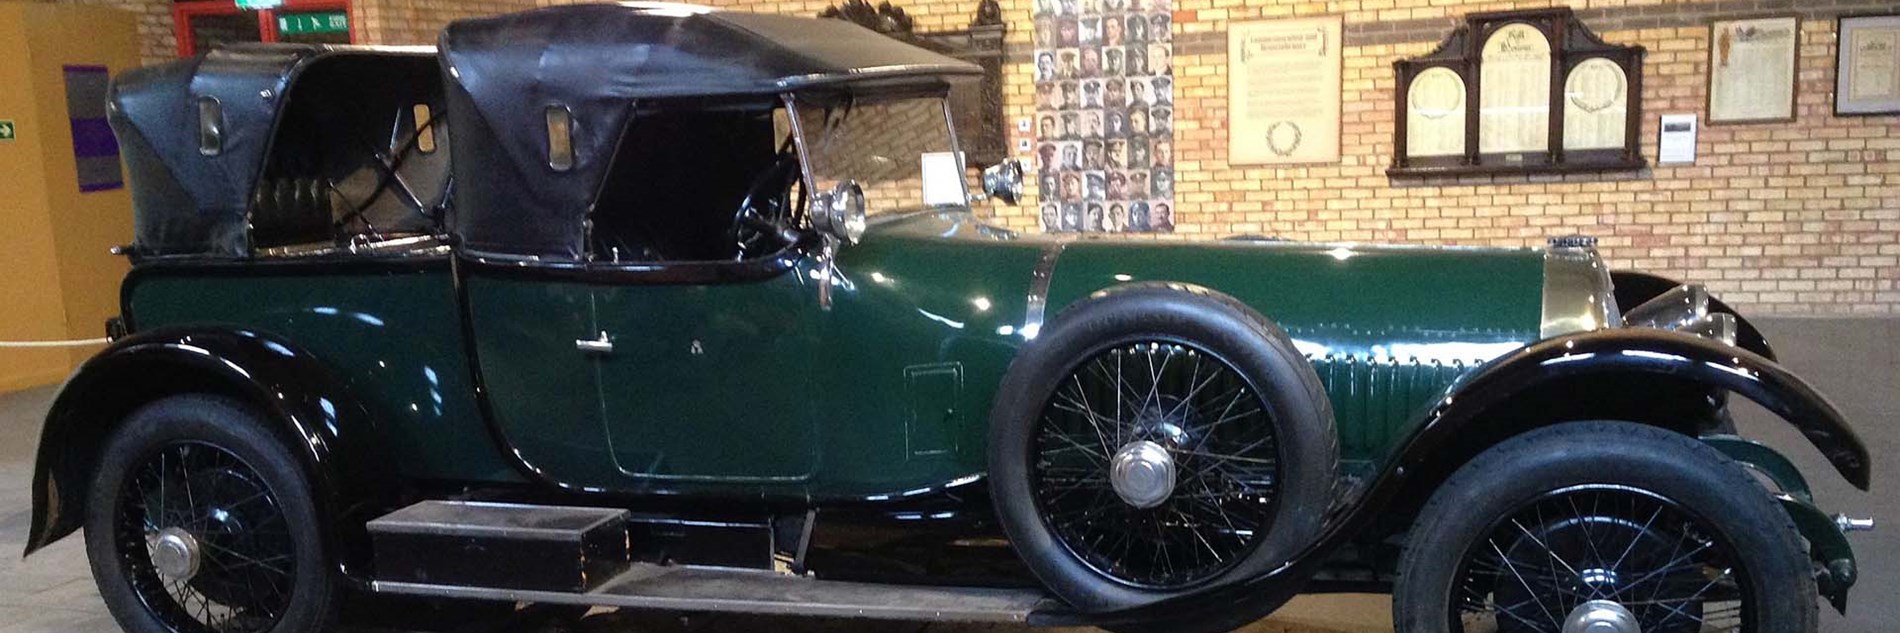 Side elevation of a large vintage car in dark green with a black leather convertible roof, chromed lamps and spoked wheels.